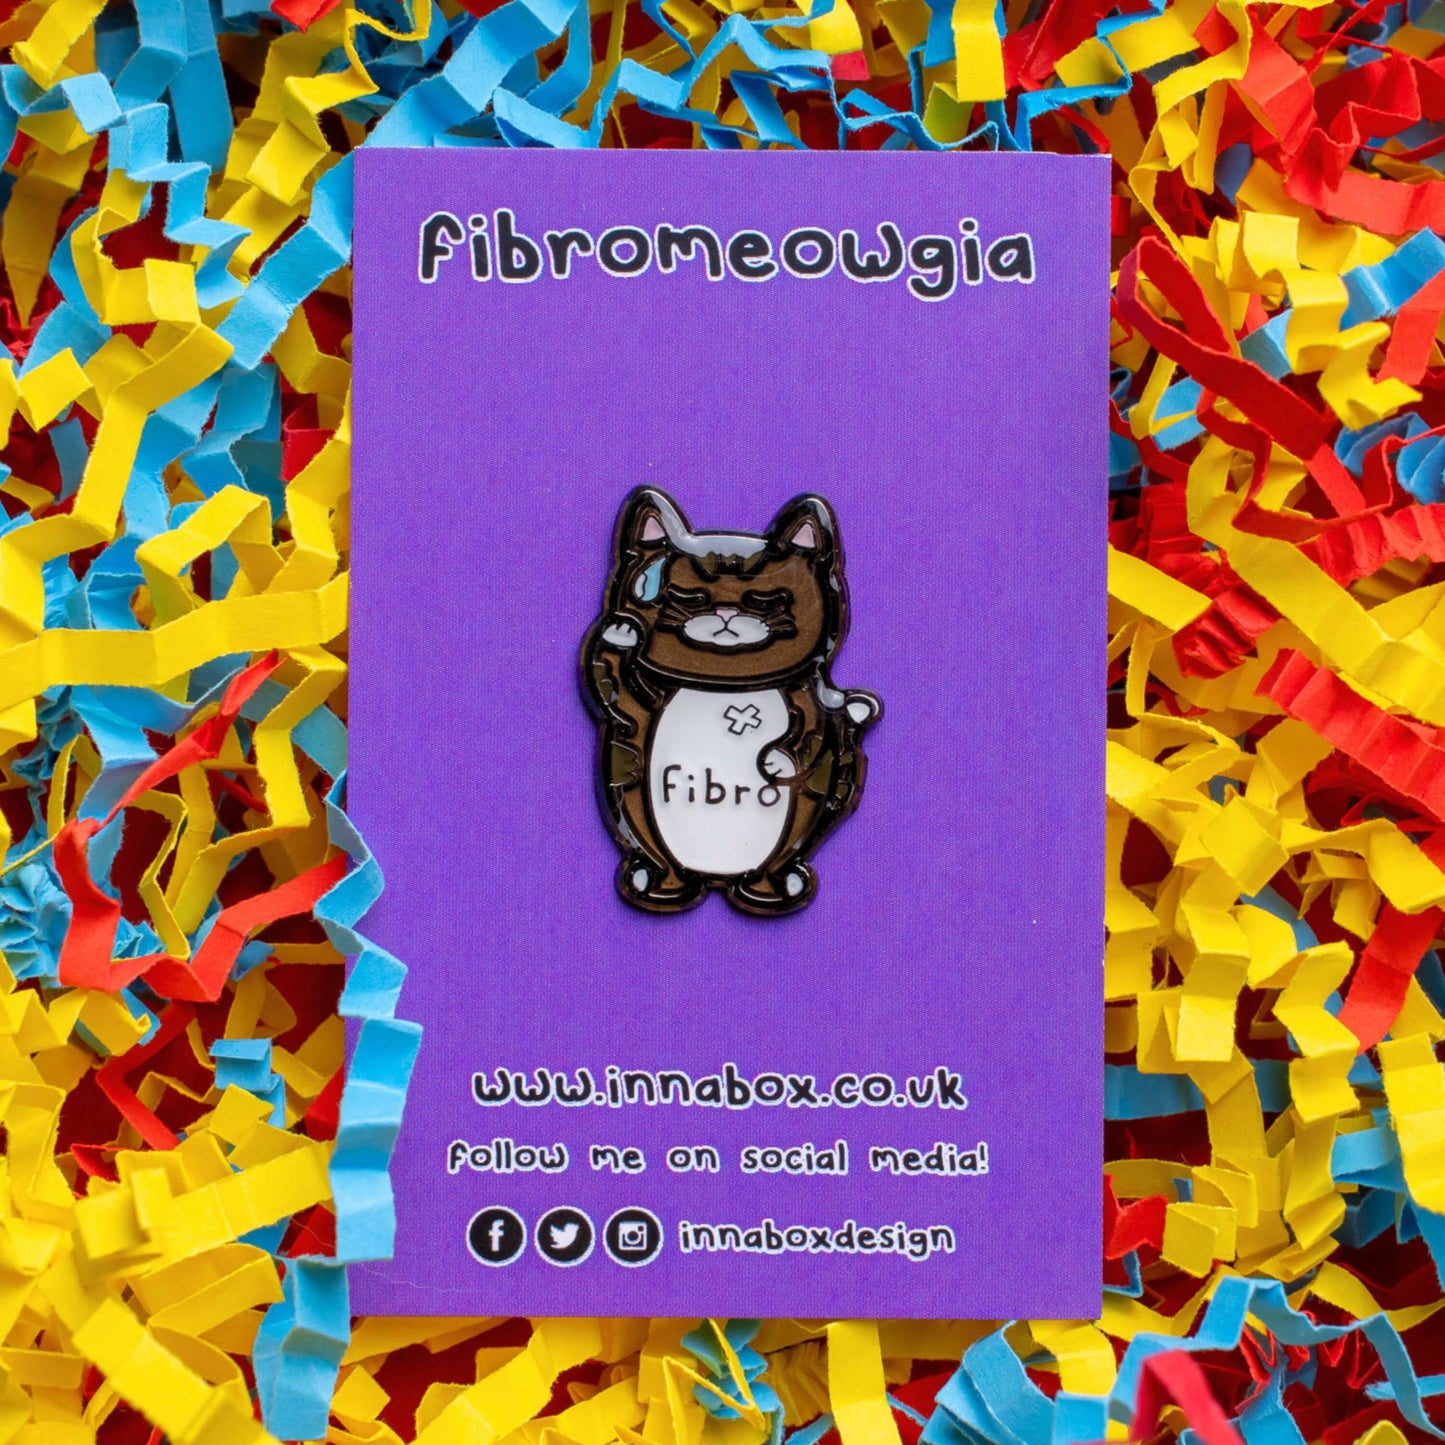 Fibromeowgia Enamel Pin - Fibromyalgia on purple backing card laid on a red, yellow and blue card confetti background. The enamel pin is a brown cat with a white stomach with fibro written across it. The cat has its eyes closed, a sweat droplet on its forehead and holding its head in its paw. The enamel pin is designed to raise awareness for fibromyalgia.